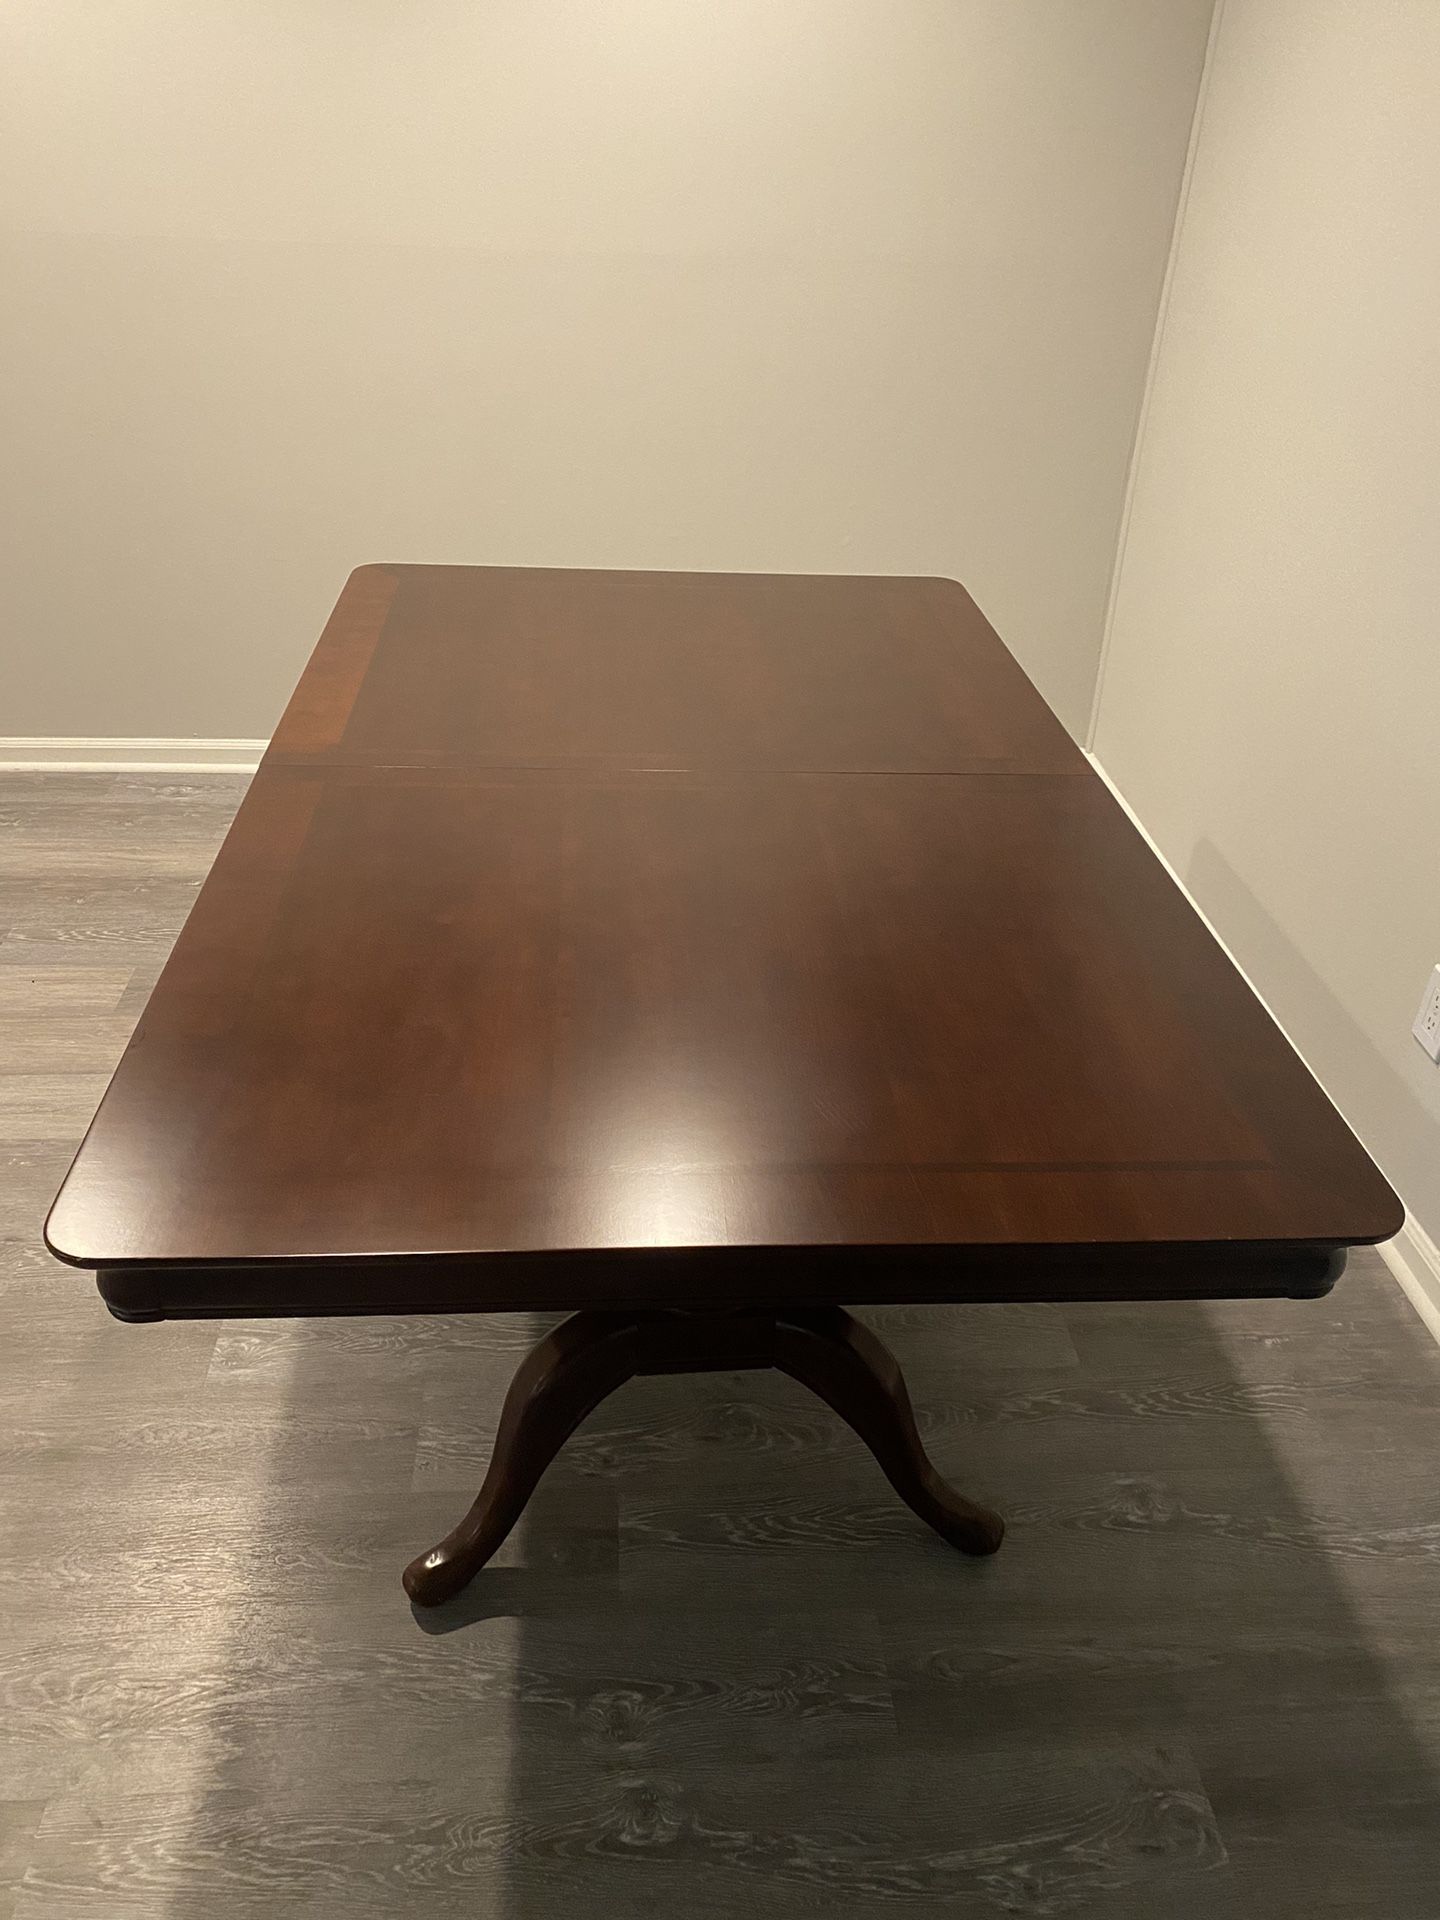 Big family! Big table! Solid Real Wood Extendable Dining Table With External Leaf. See Dimensions.